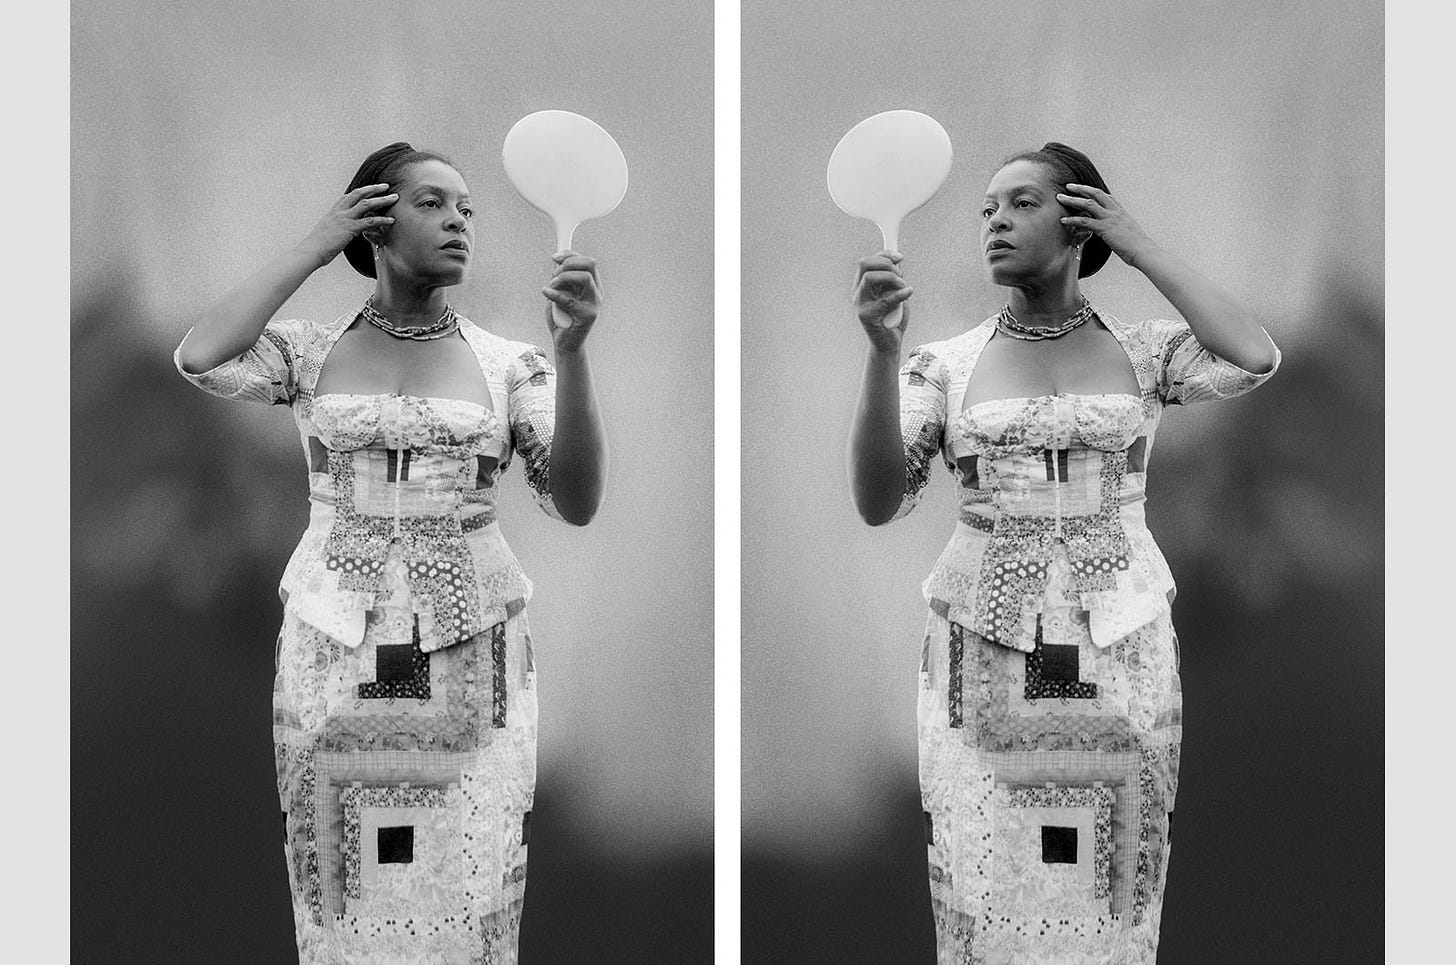 Carrie Mae Weems, I Looked and Looked but Failed to See What so Terrified You (Louisiana Project series)